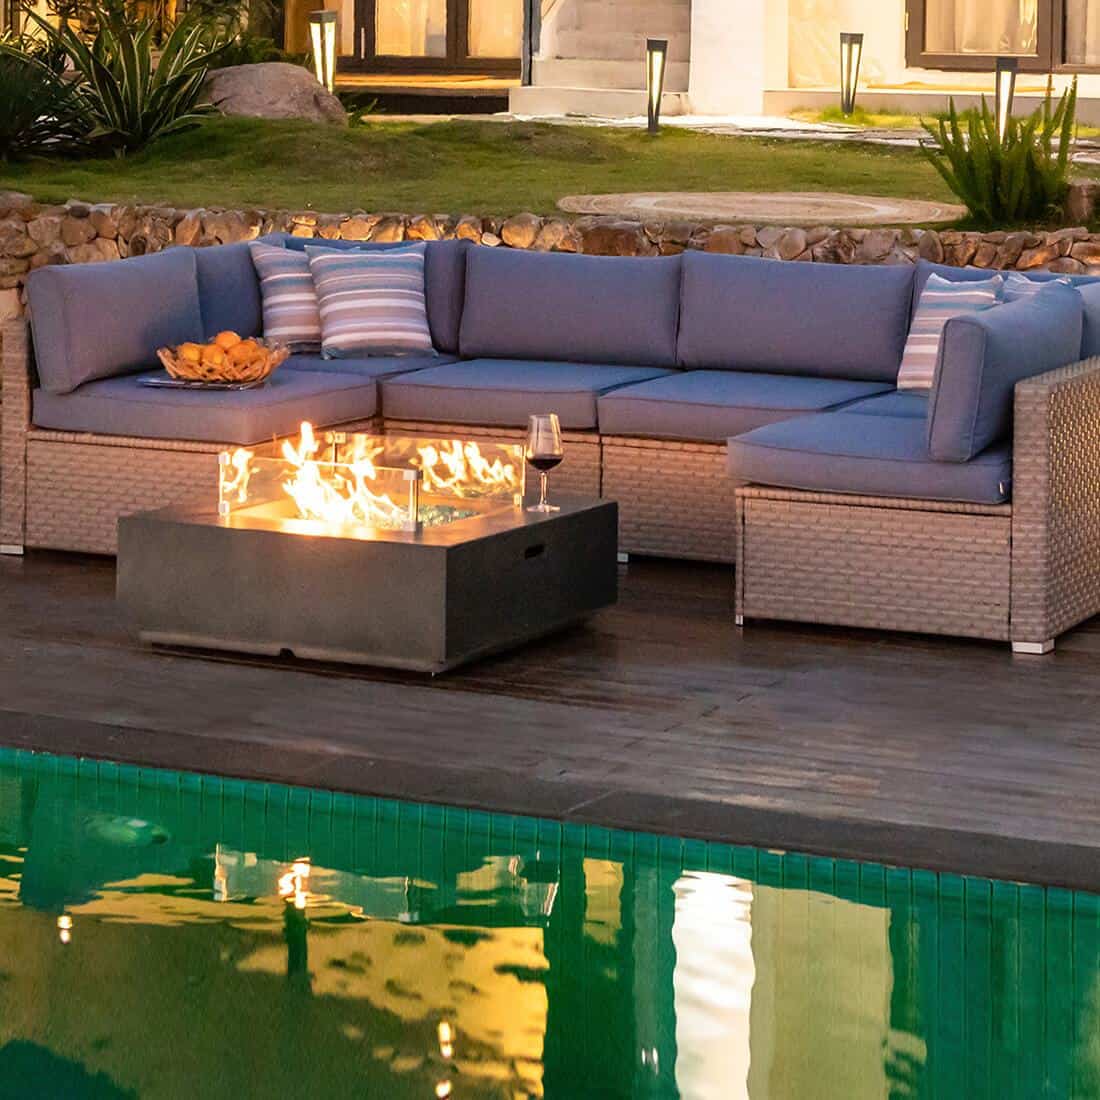 Maui 7 Piece Outdoor Sofa Set with Square Fire Pit and Tank Cover